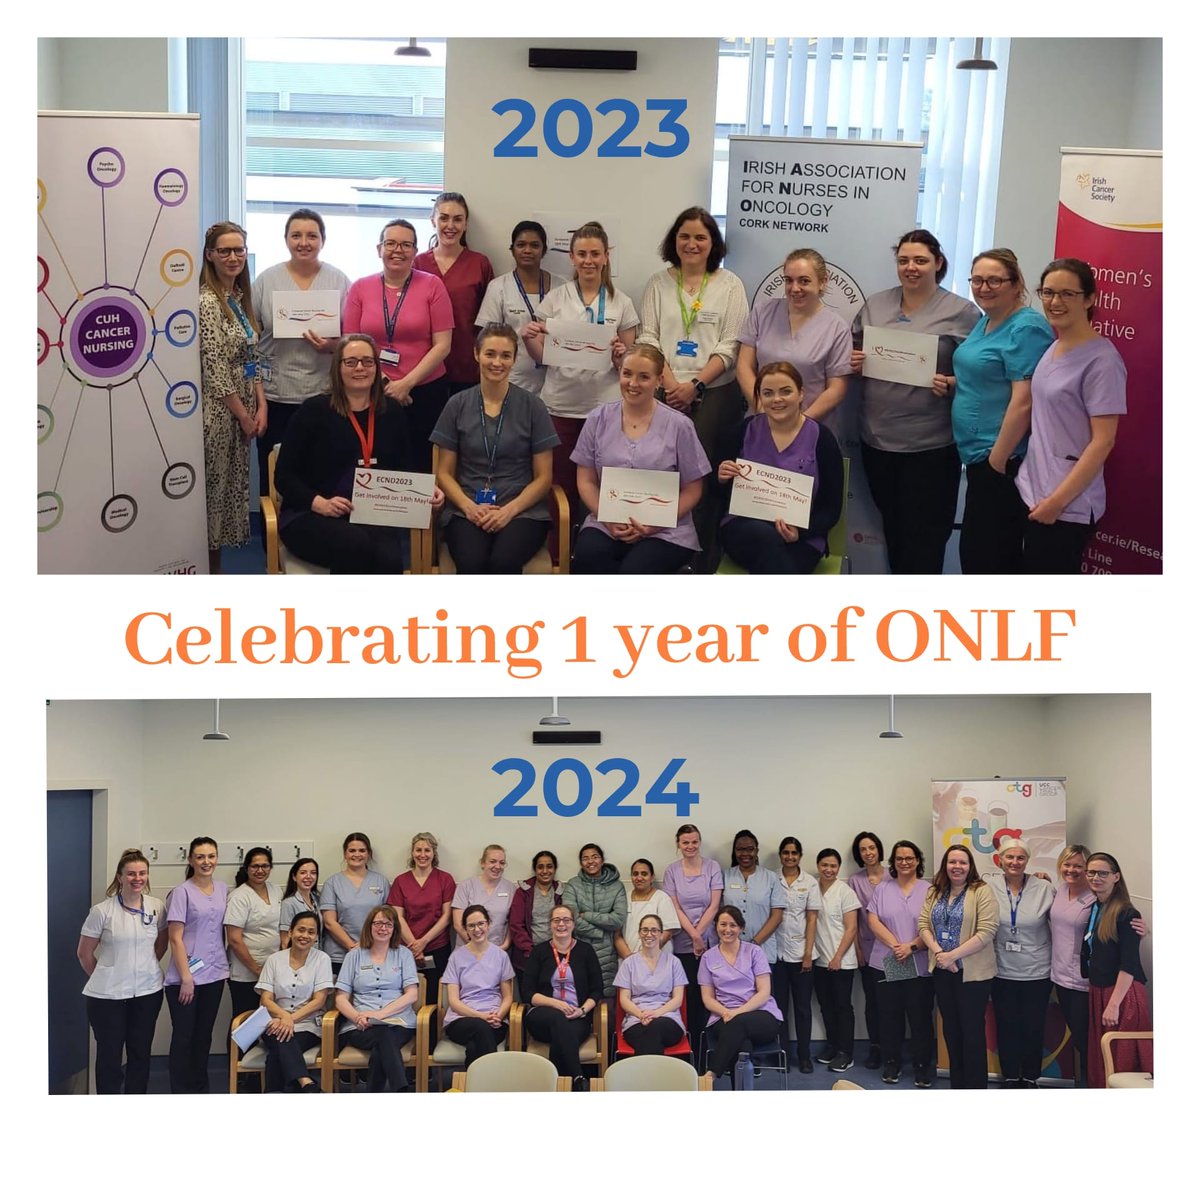 Celebrating our first anniversary of the Oncology Nuring Learning Forum launched on ECND 23. We are privileged to work with such a dynamic and fantastic cancer team @CUH_Cork @IANOCancerNurse @Magnet4europeH @UCCCancerTrials @maeve_cloherty @jane_shanahan @mazerini1 @KateOCon11